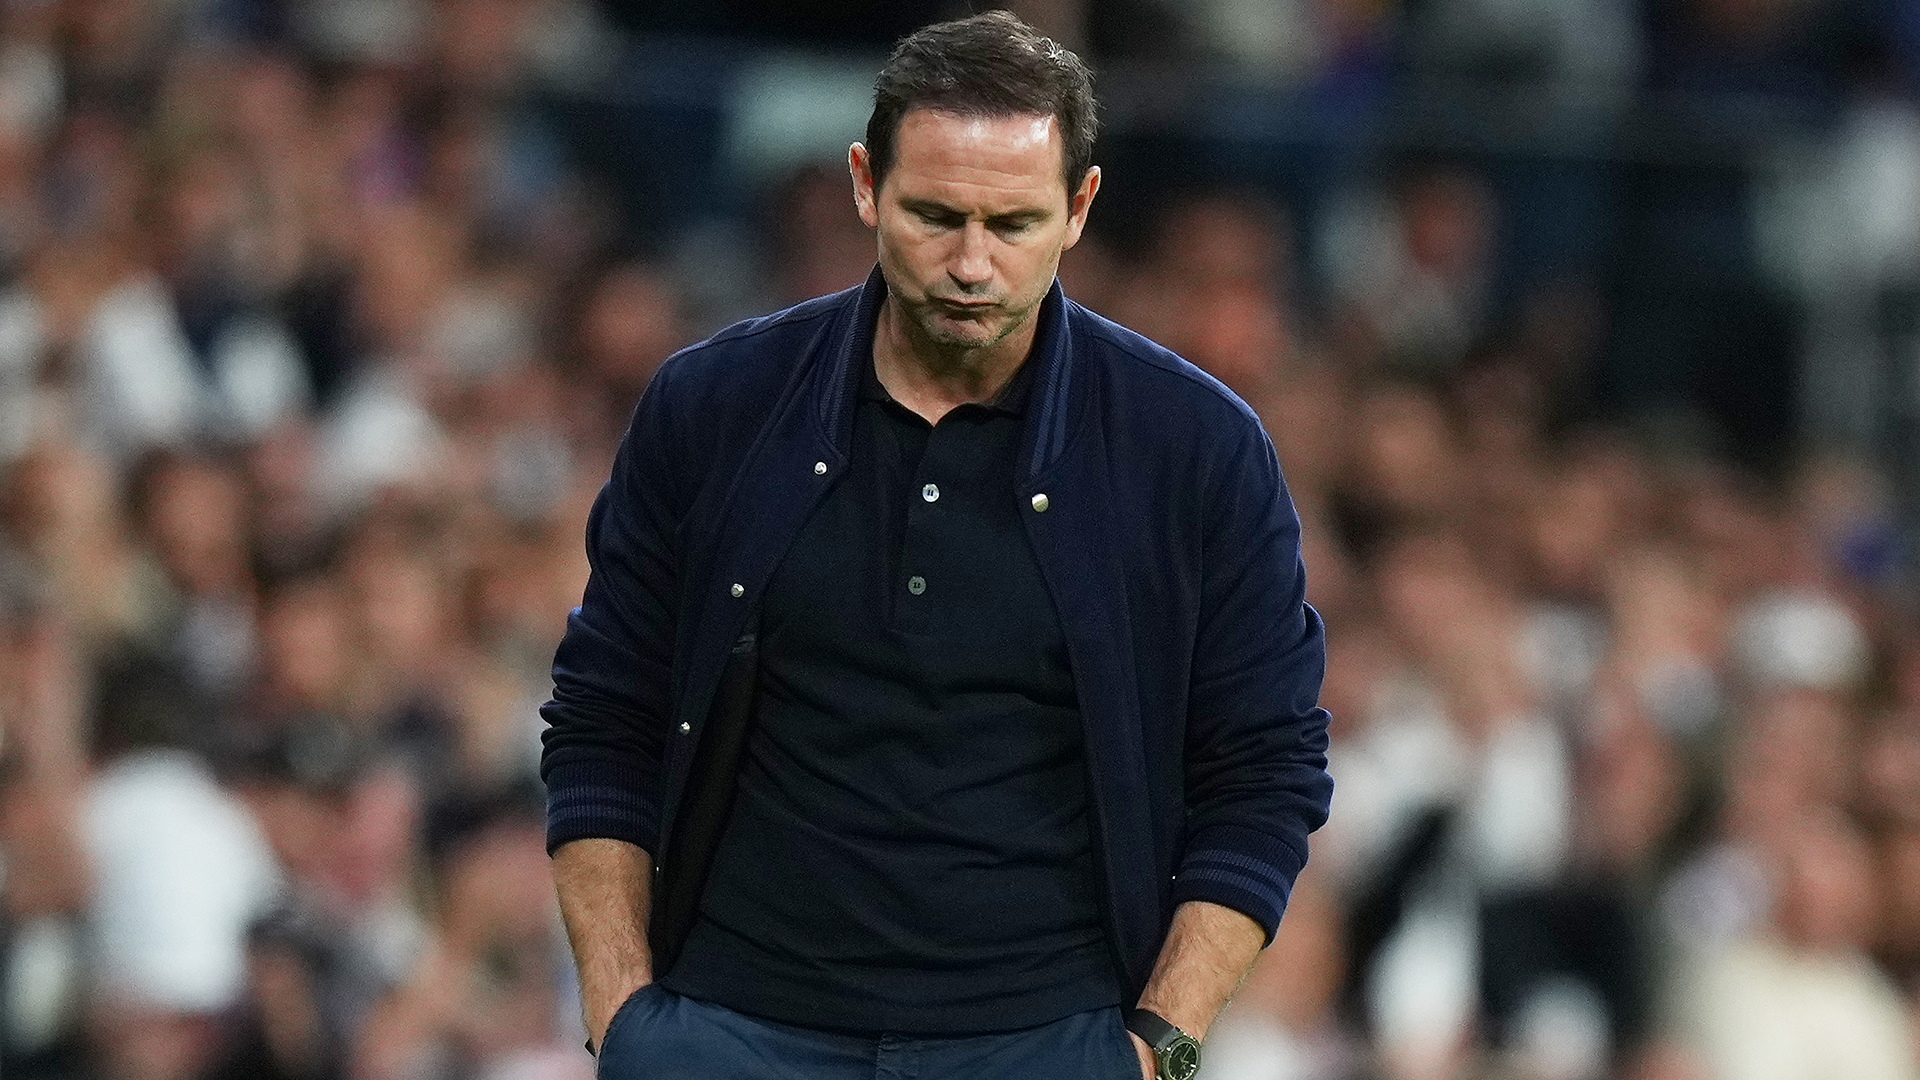 Frank Lampard, Caretaker Manager of Chelsea, looks dejected during the UEFA Champions League quarterfinal first leg match between Real Madrid and Chelsea FC at Estadio Santiago Bernabeu on April 12, 2023 in Madrid, Spain.